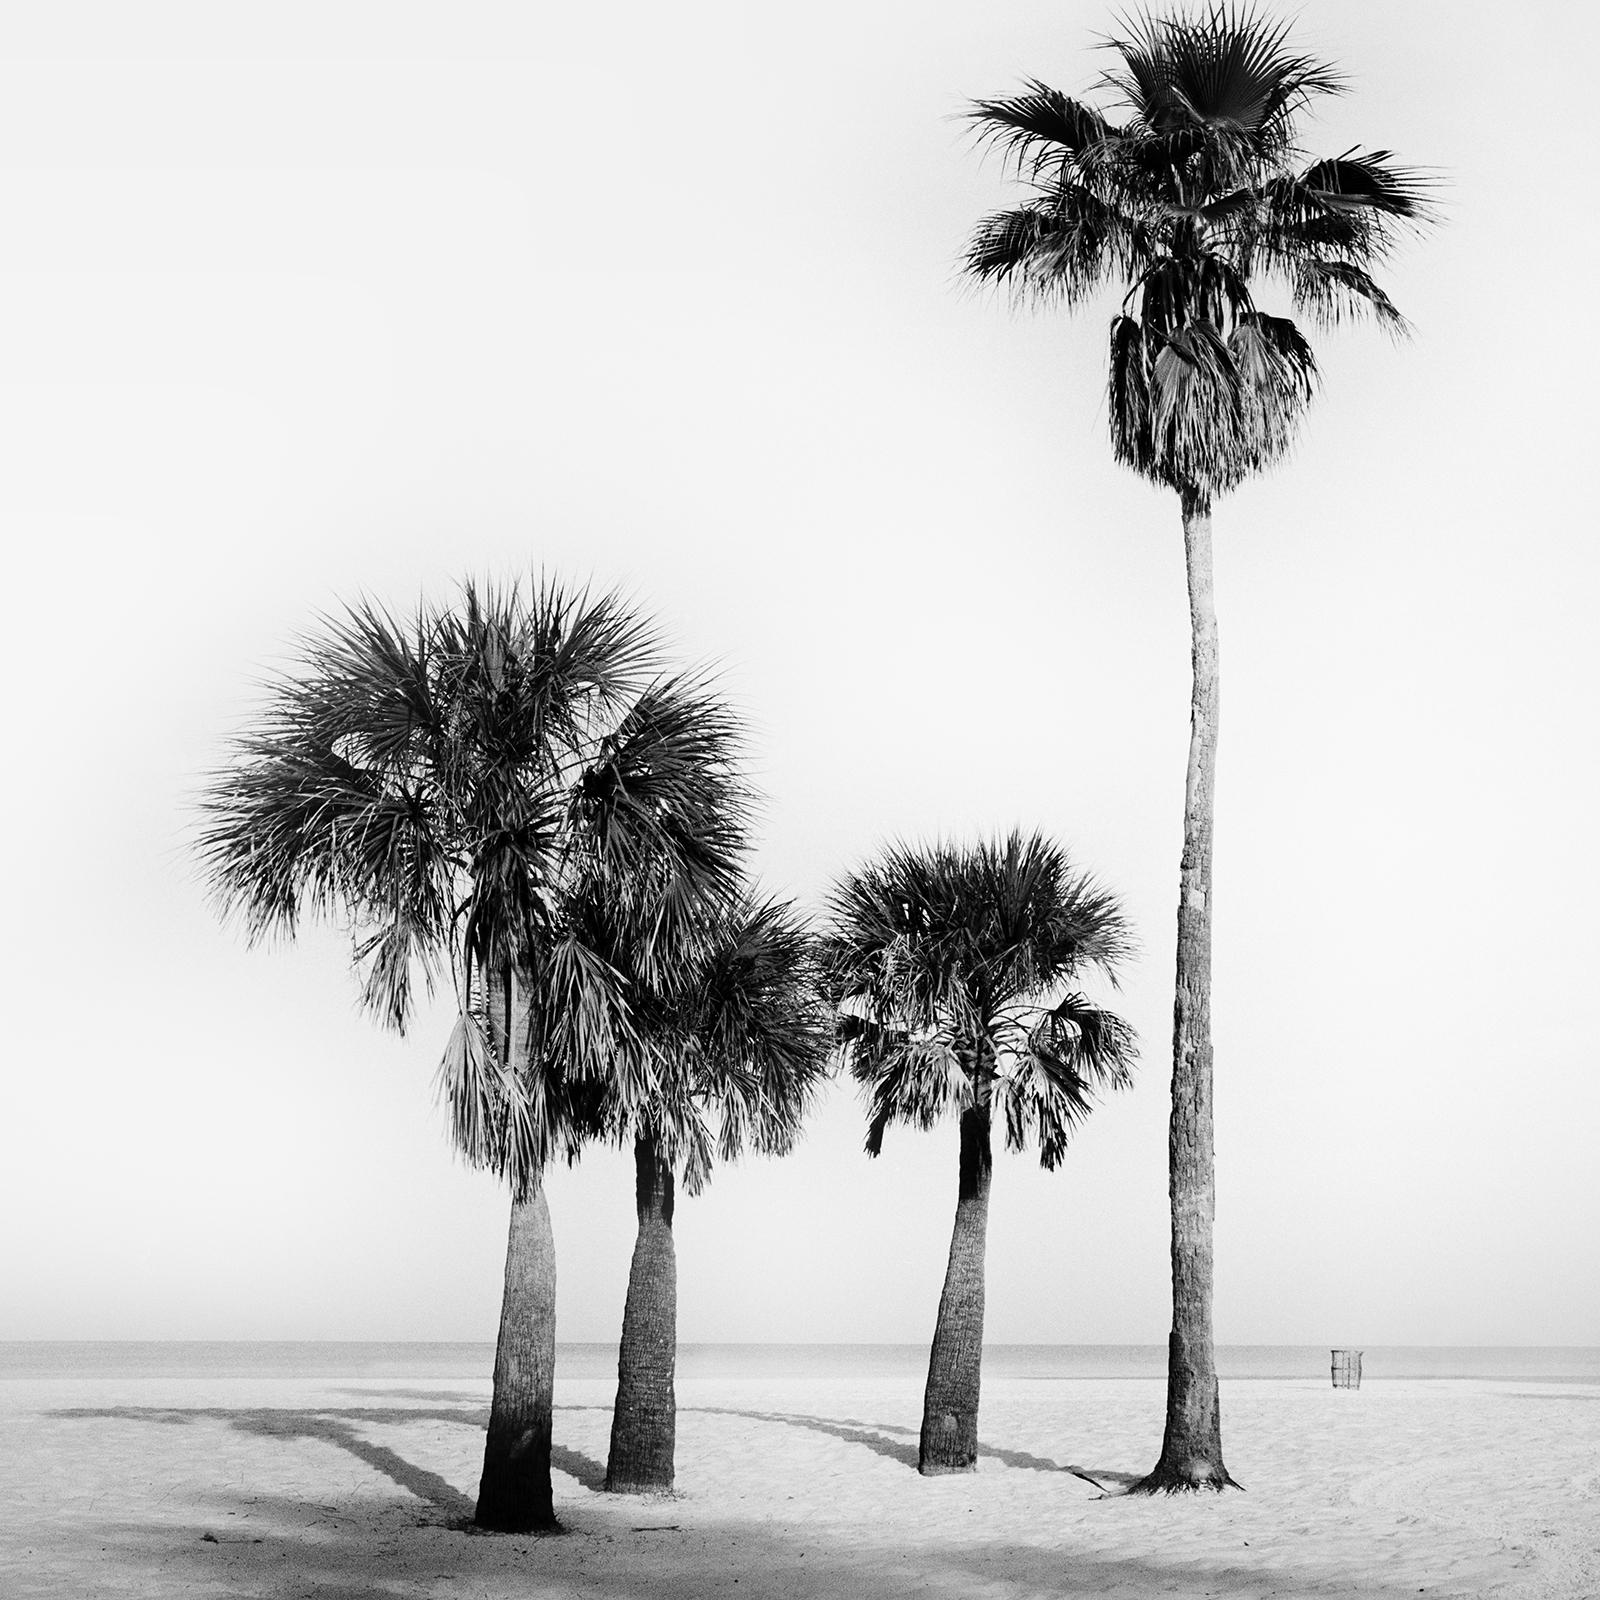 Black and White Fine Art Large Format Photography. Palm trees, beach, morning mood, Florida, USA. Archival pigment ink print, edition of 7. Signed, titled, dated and numbered by artist. Certificate of authenticity included. Printed with 4cm white